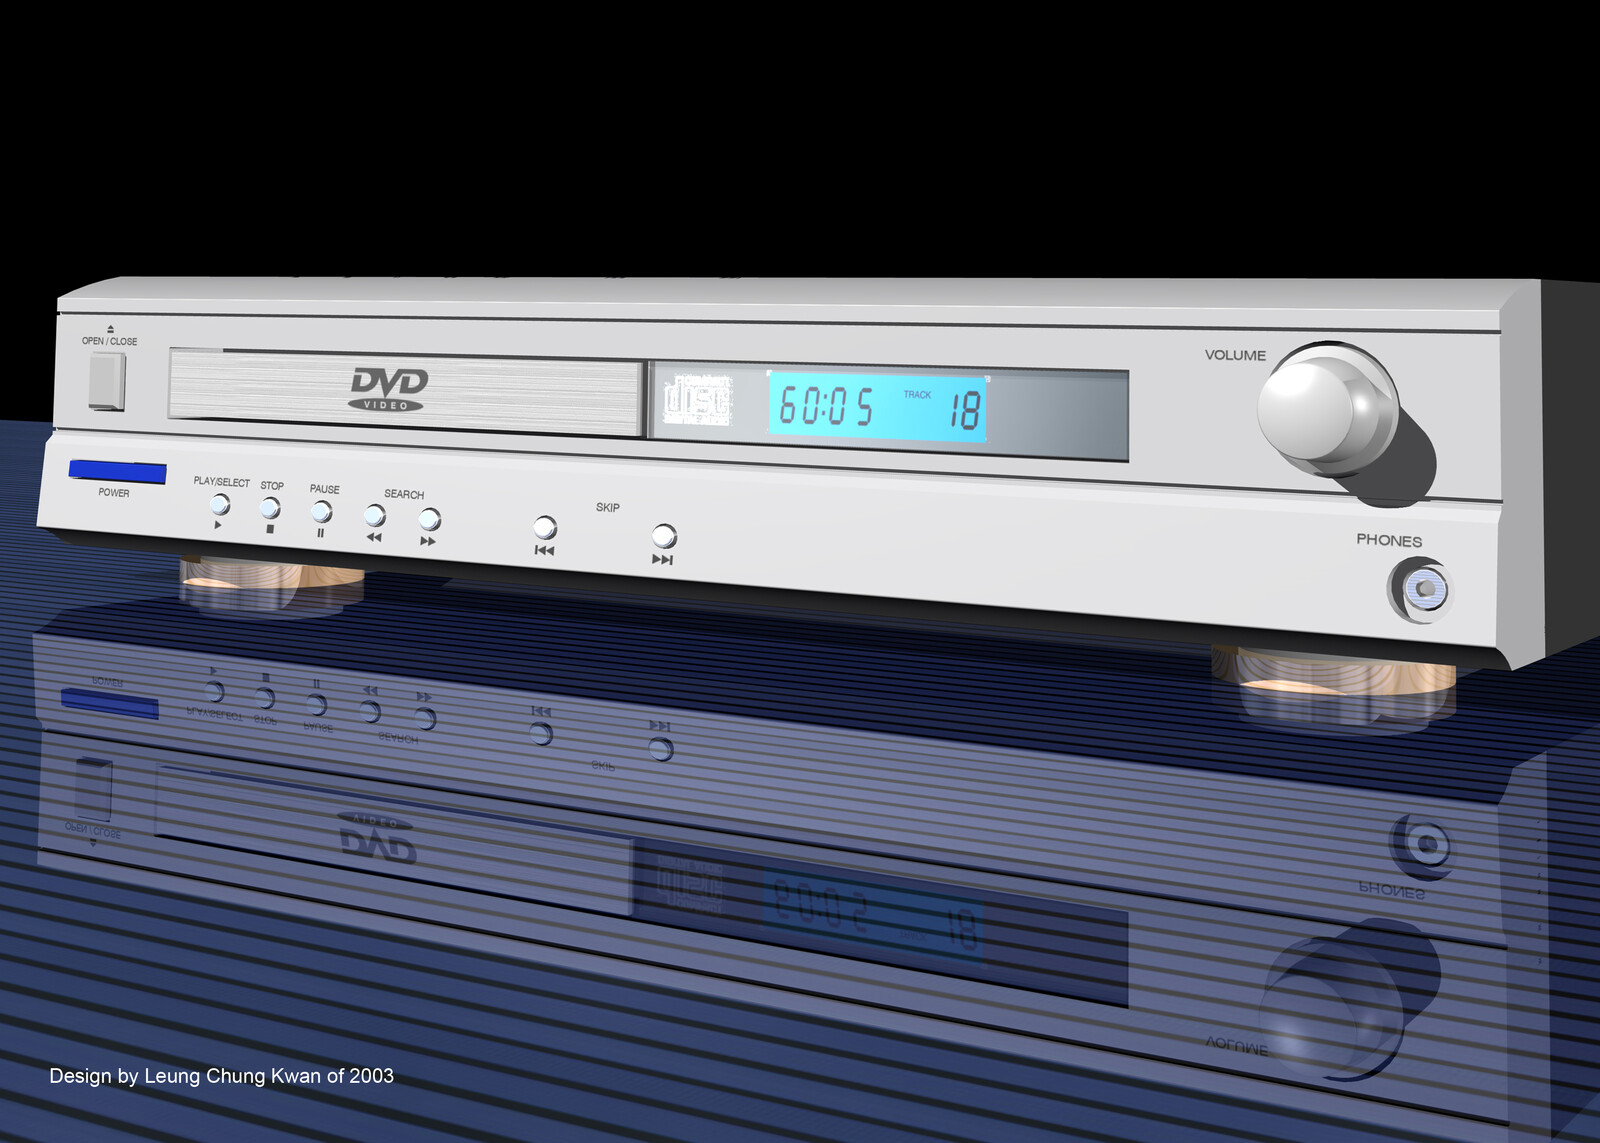 💎 Stand-Alone DVD Player | Design by Leung Chung Kwan on 2003 💎